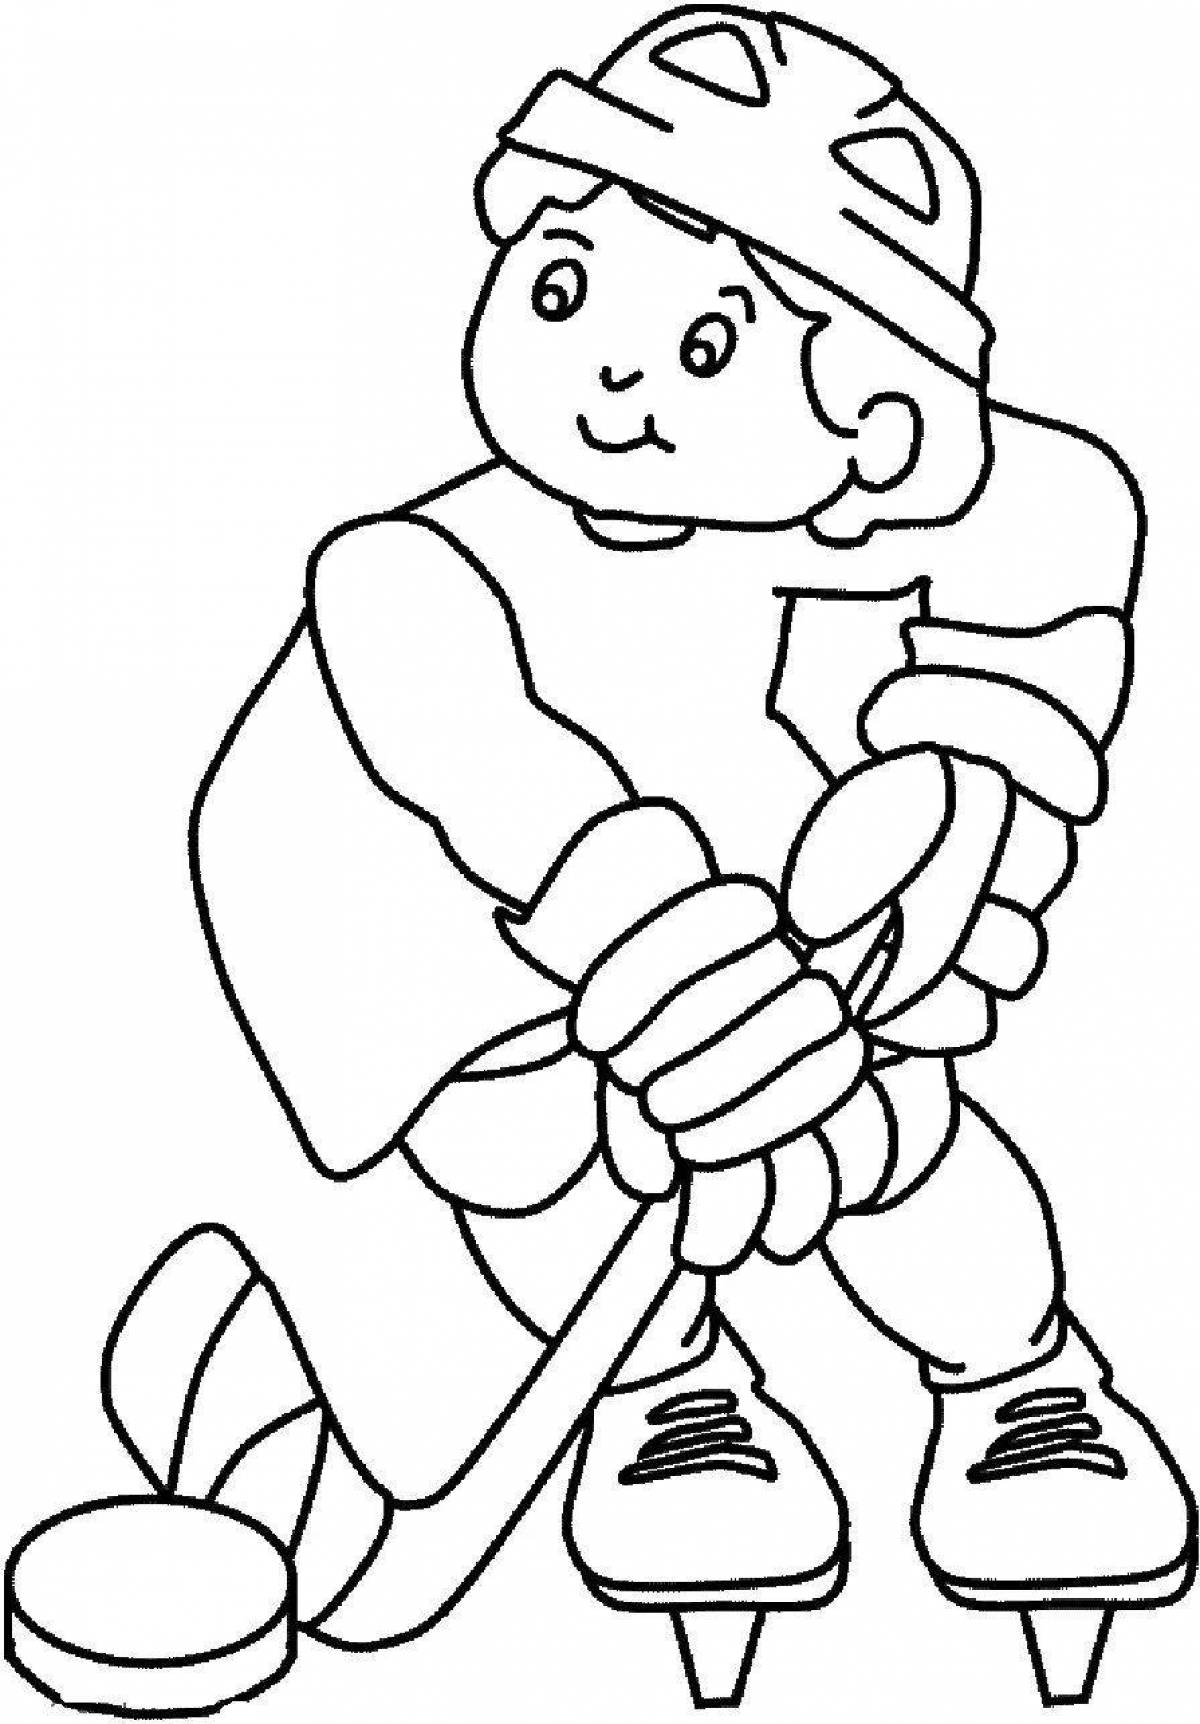 Exciting coloring book sports winter games